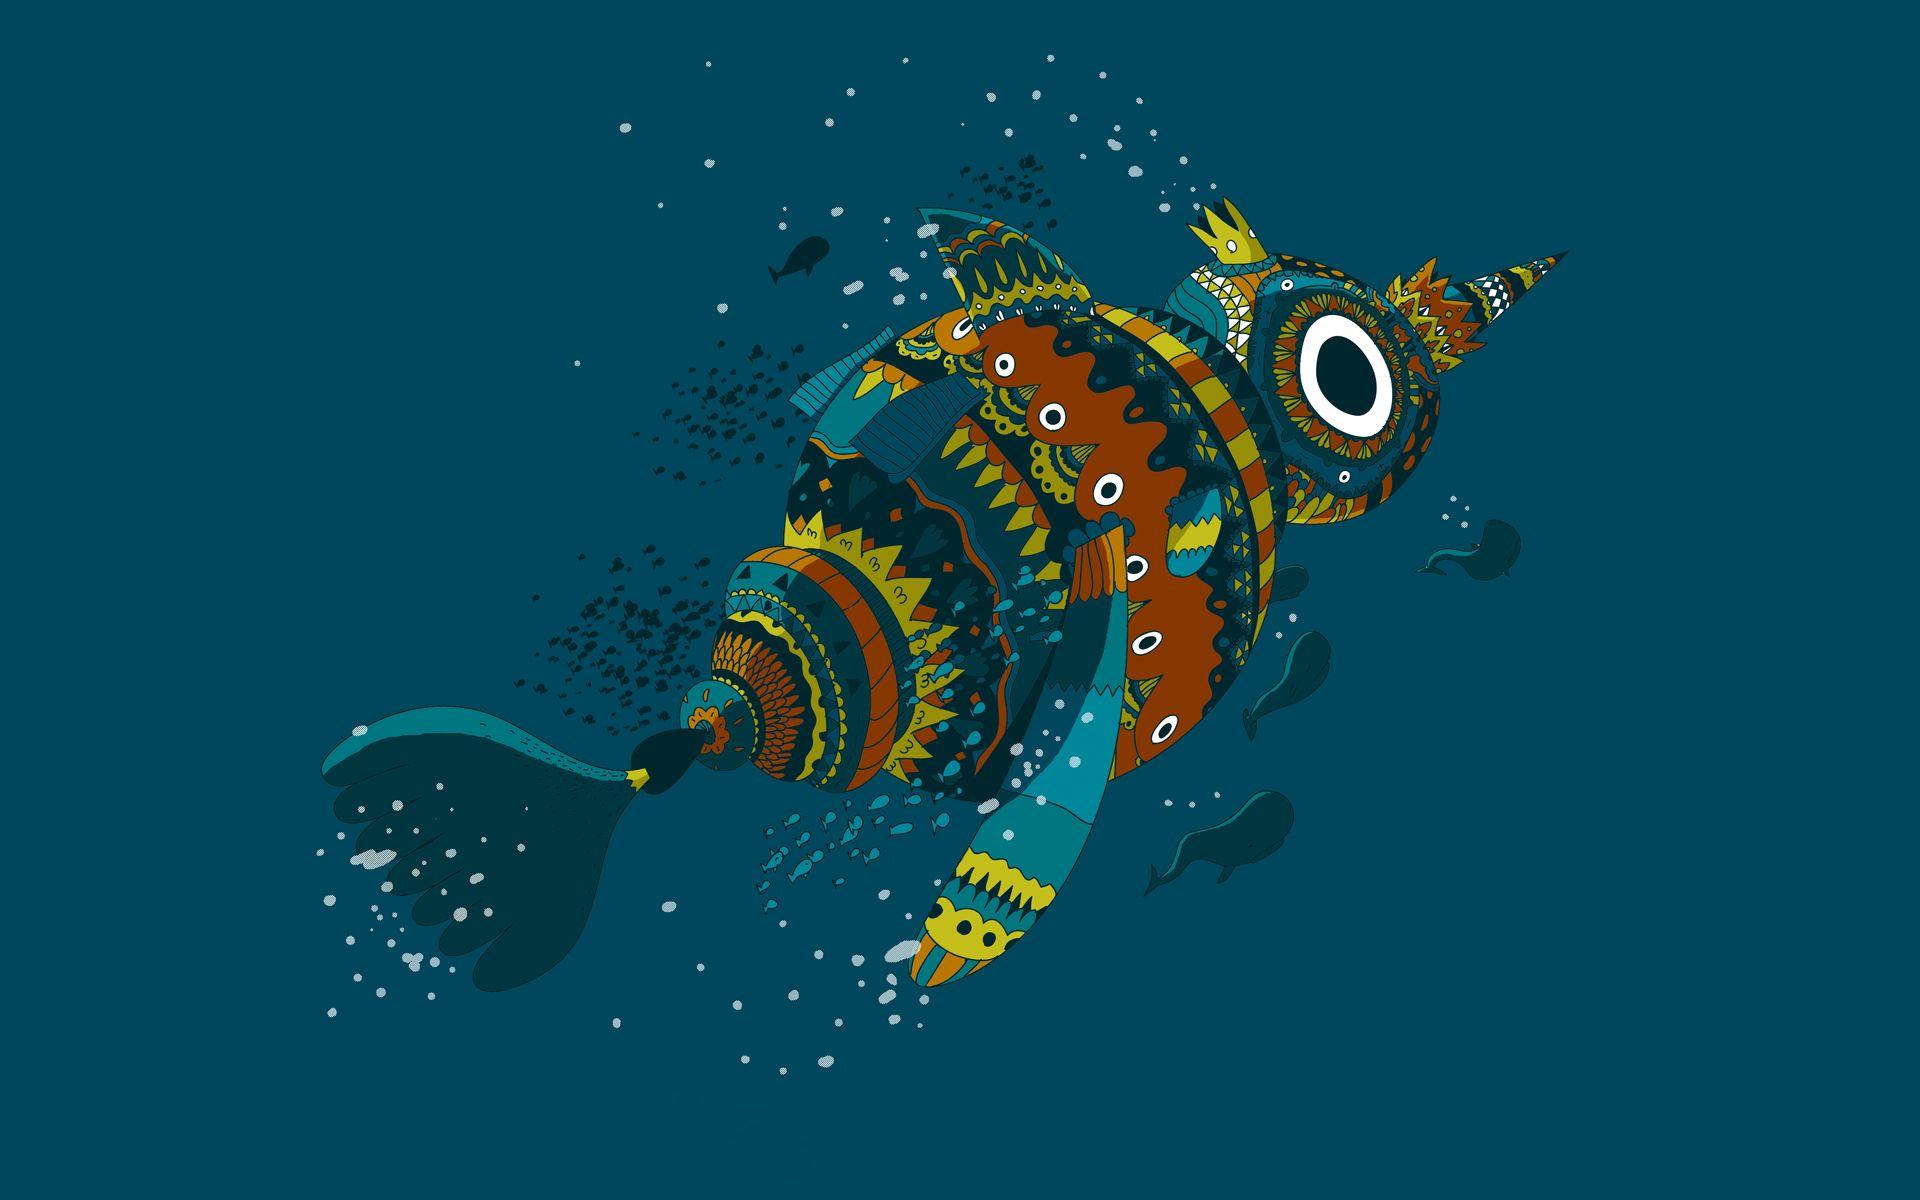 Download the Tribal Totem Whale Wallpaper, Tribal Totem Whale iPhone